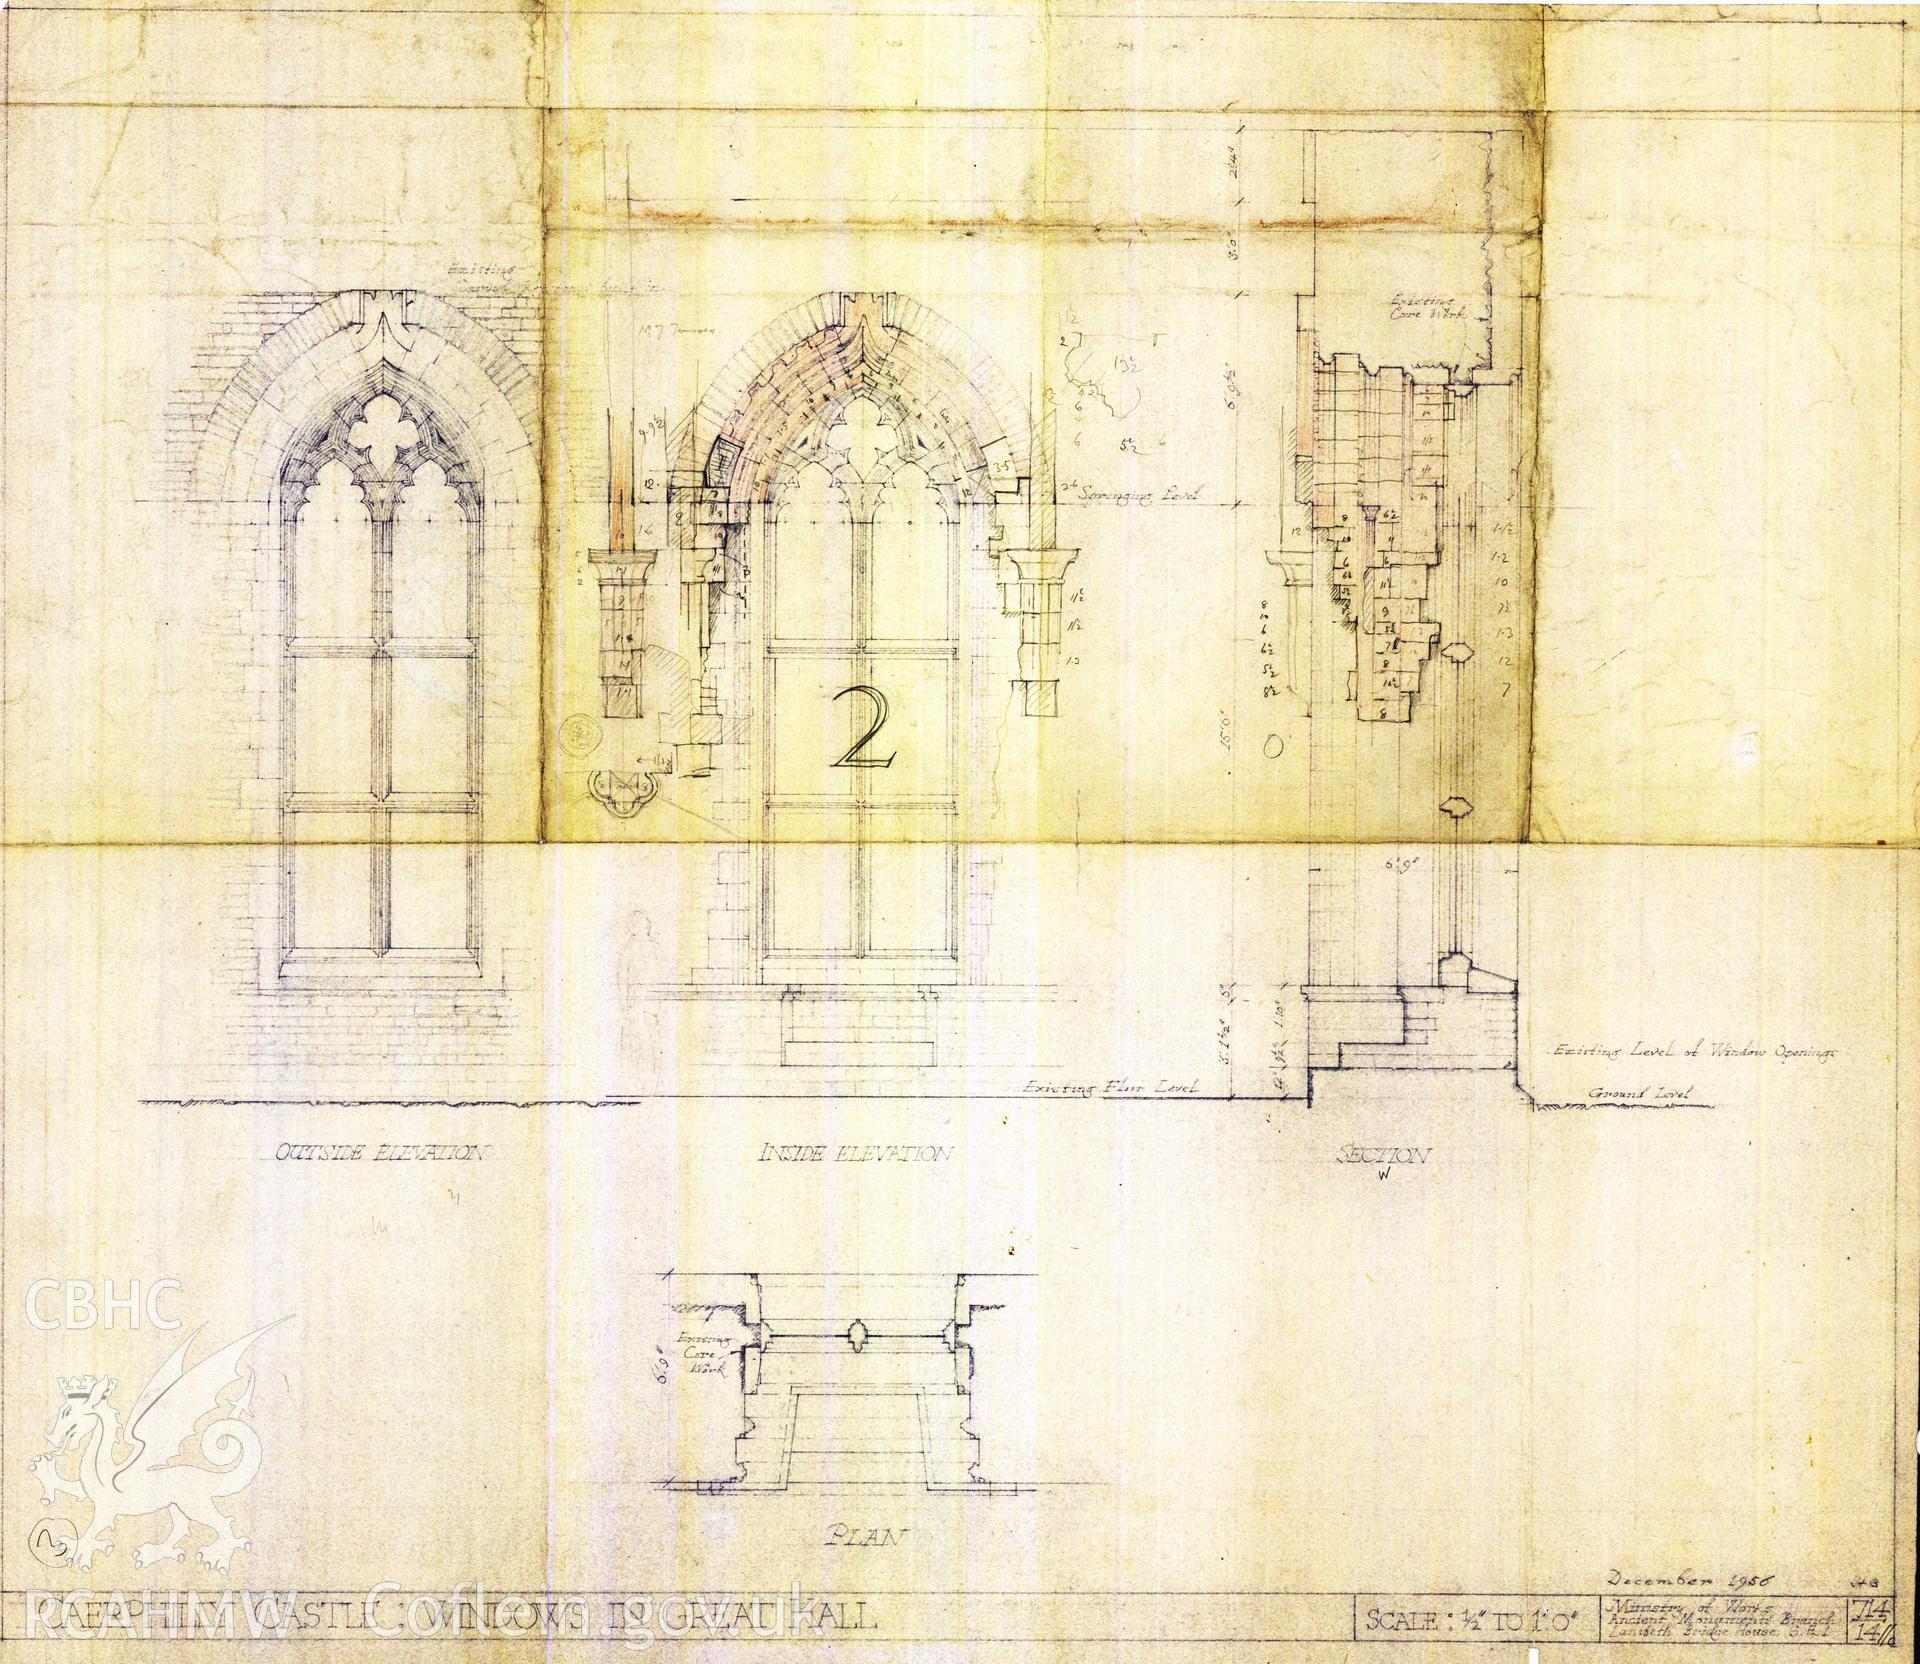 Cadw guardianship monument drawing of Caerphilly Castle. Hall, window 2, stonework +W jamb. Cadw ref. no: 714/14//c. Scale 1:24.